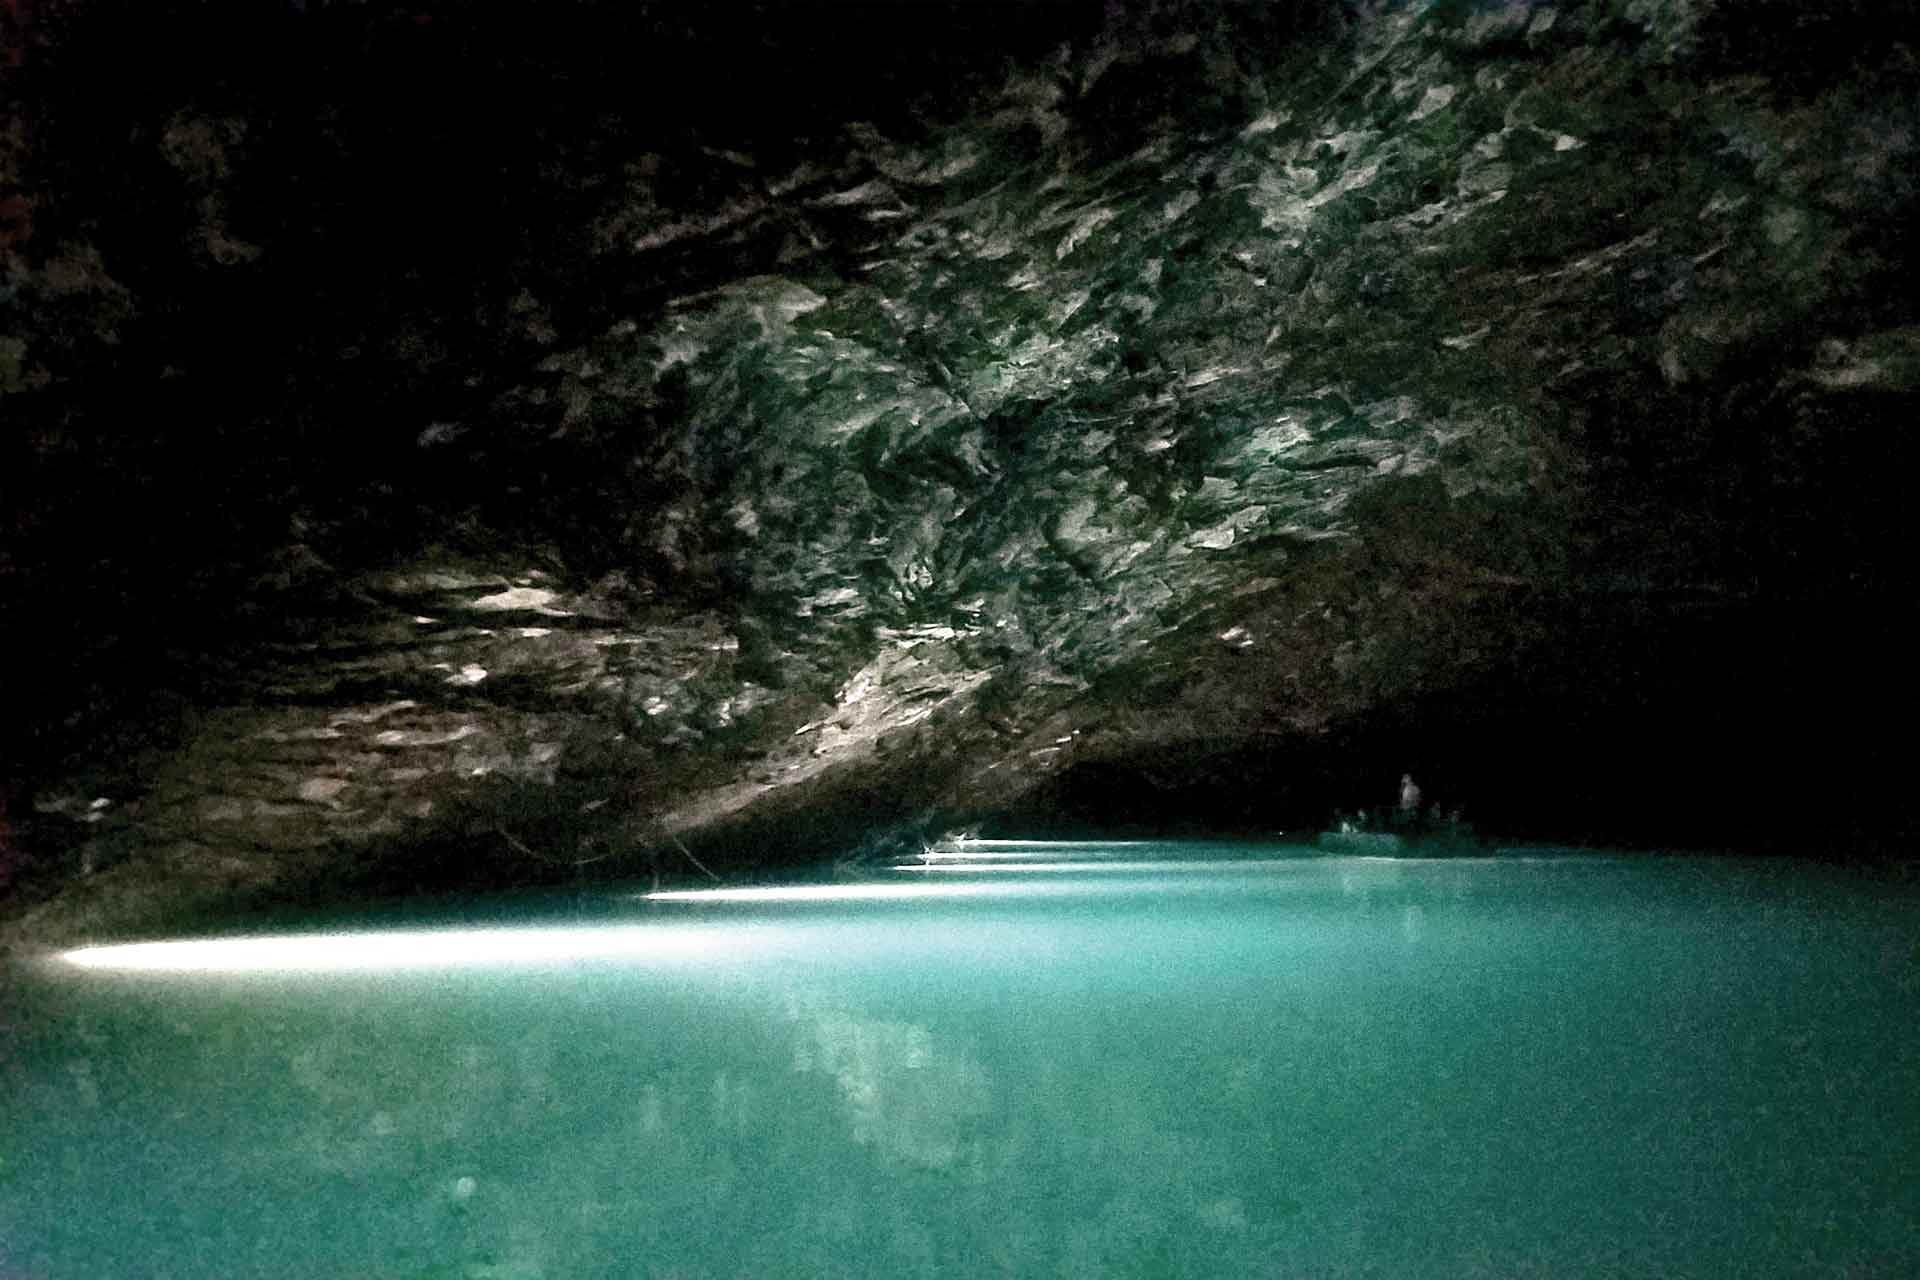 A view of an underground lake with a boat floating by.